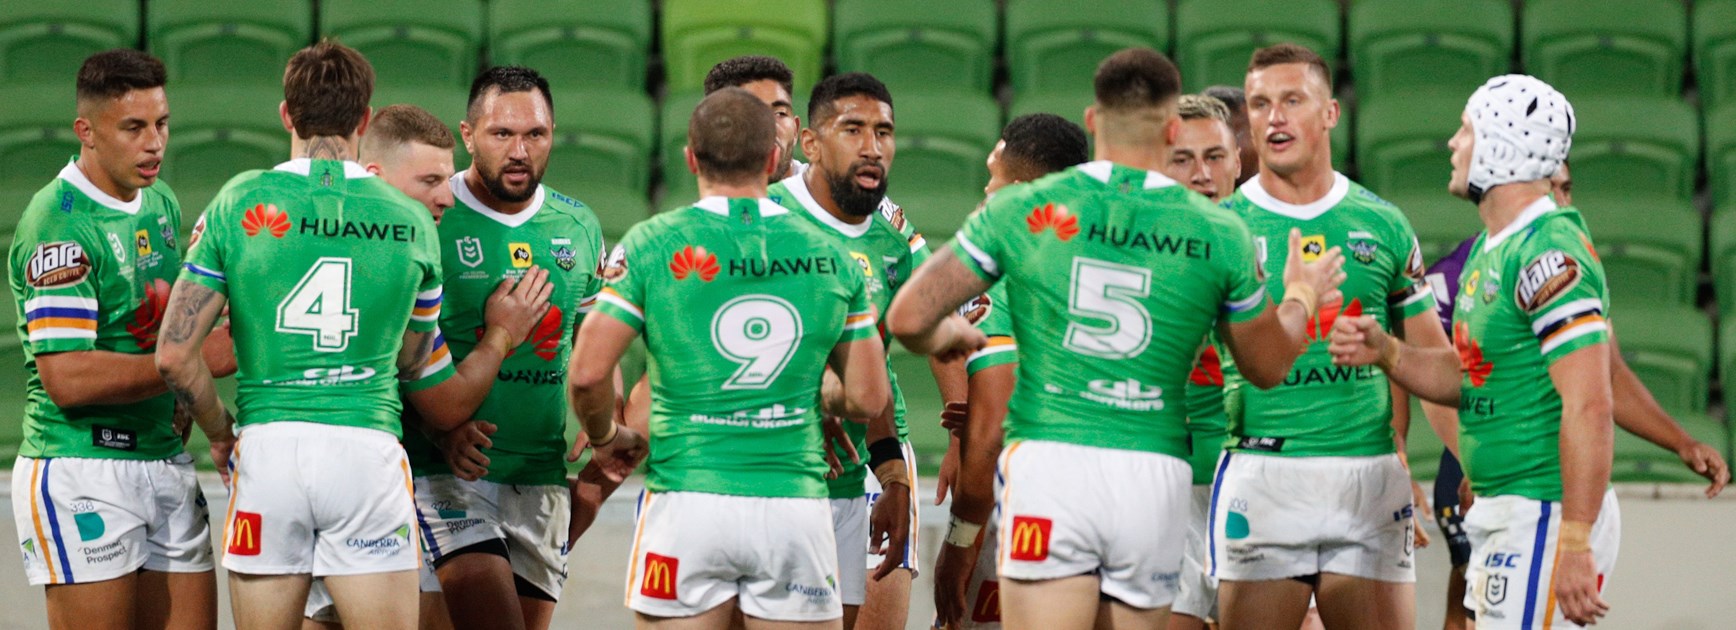 NRL Match Report: Raiders too classy against Storm